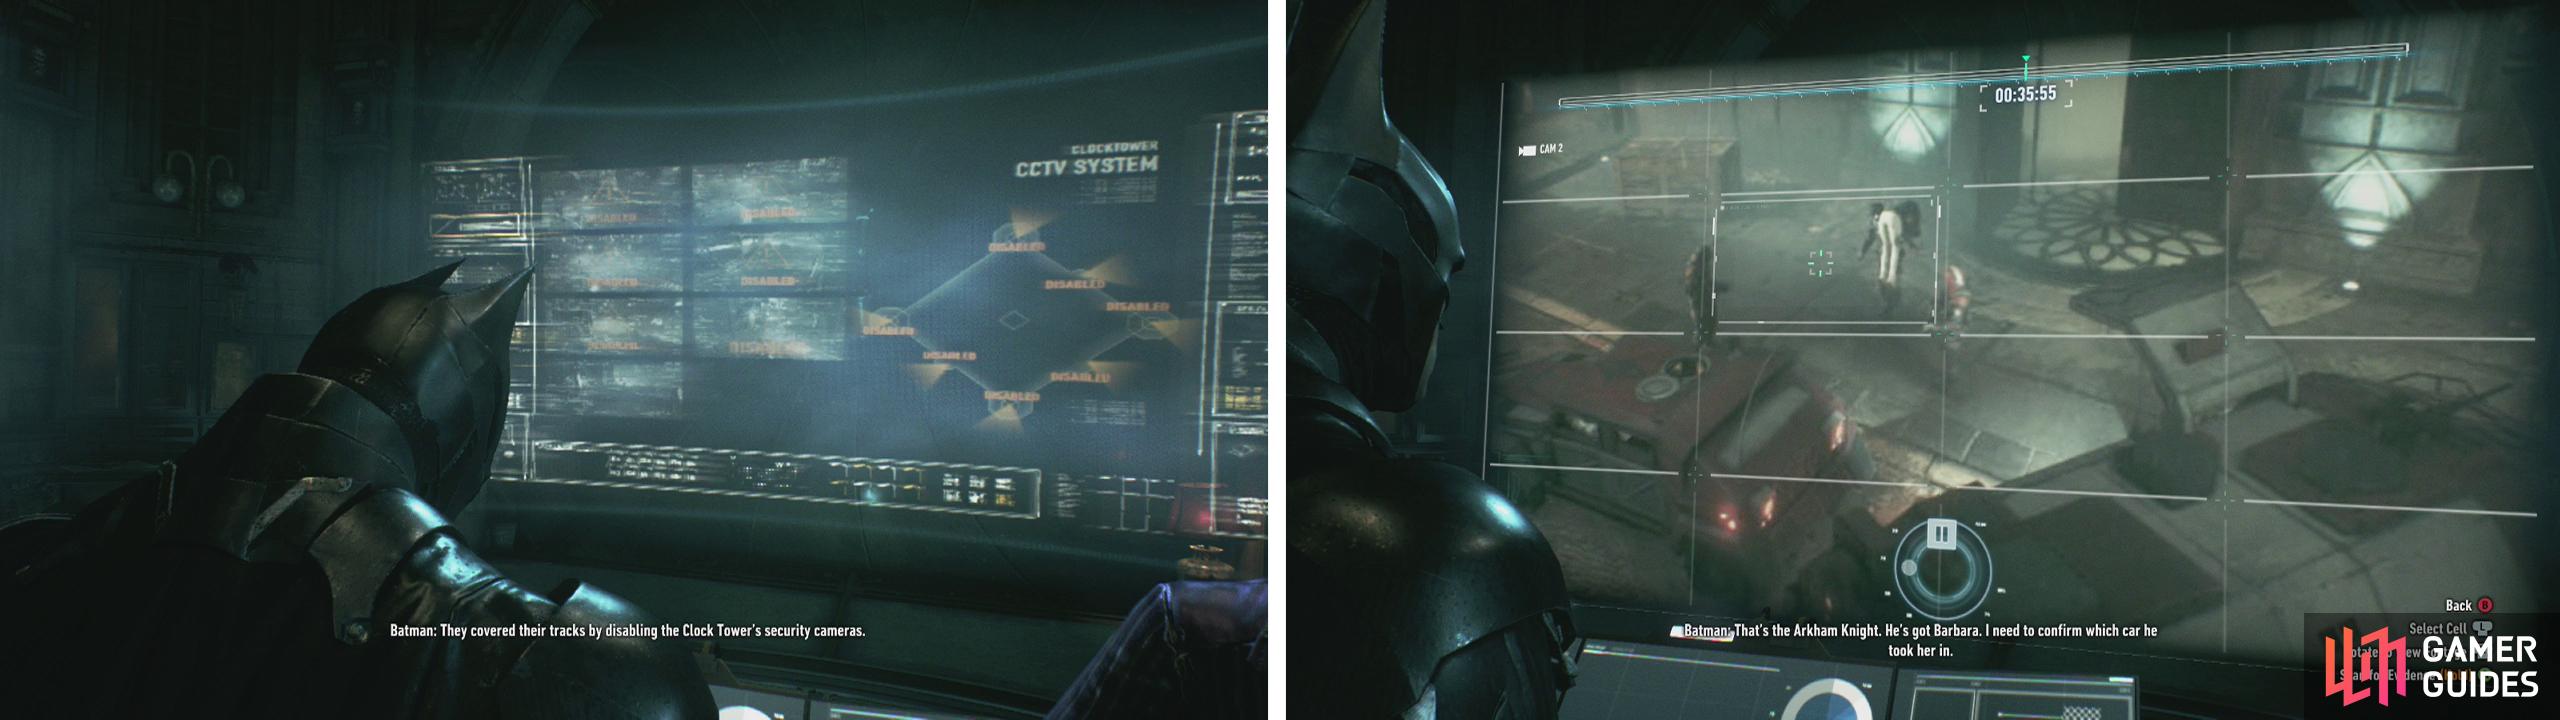 Enter the Clock Tower and use the Batcomputer (left). Scan the video (right) to update the objectives.